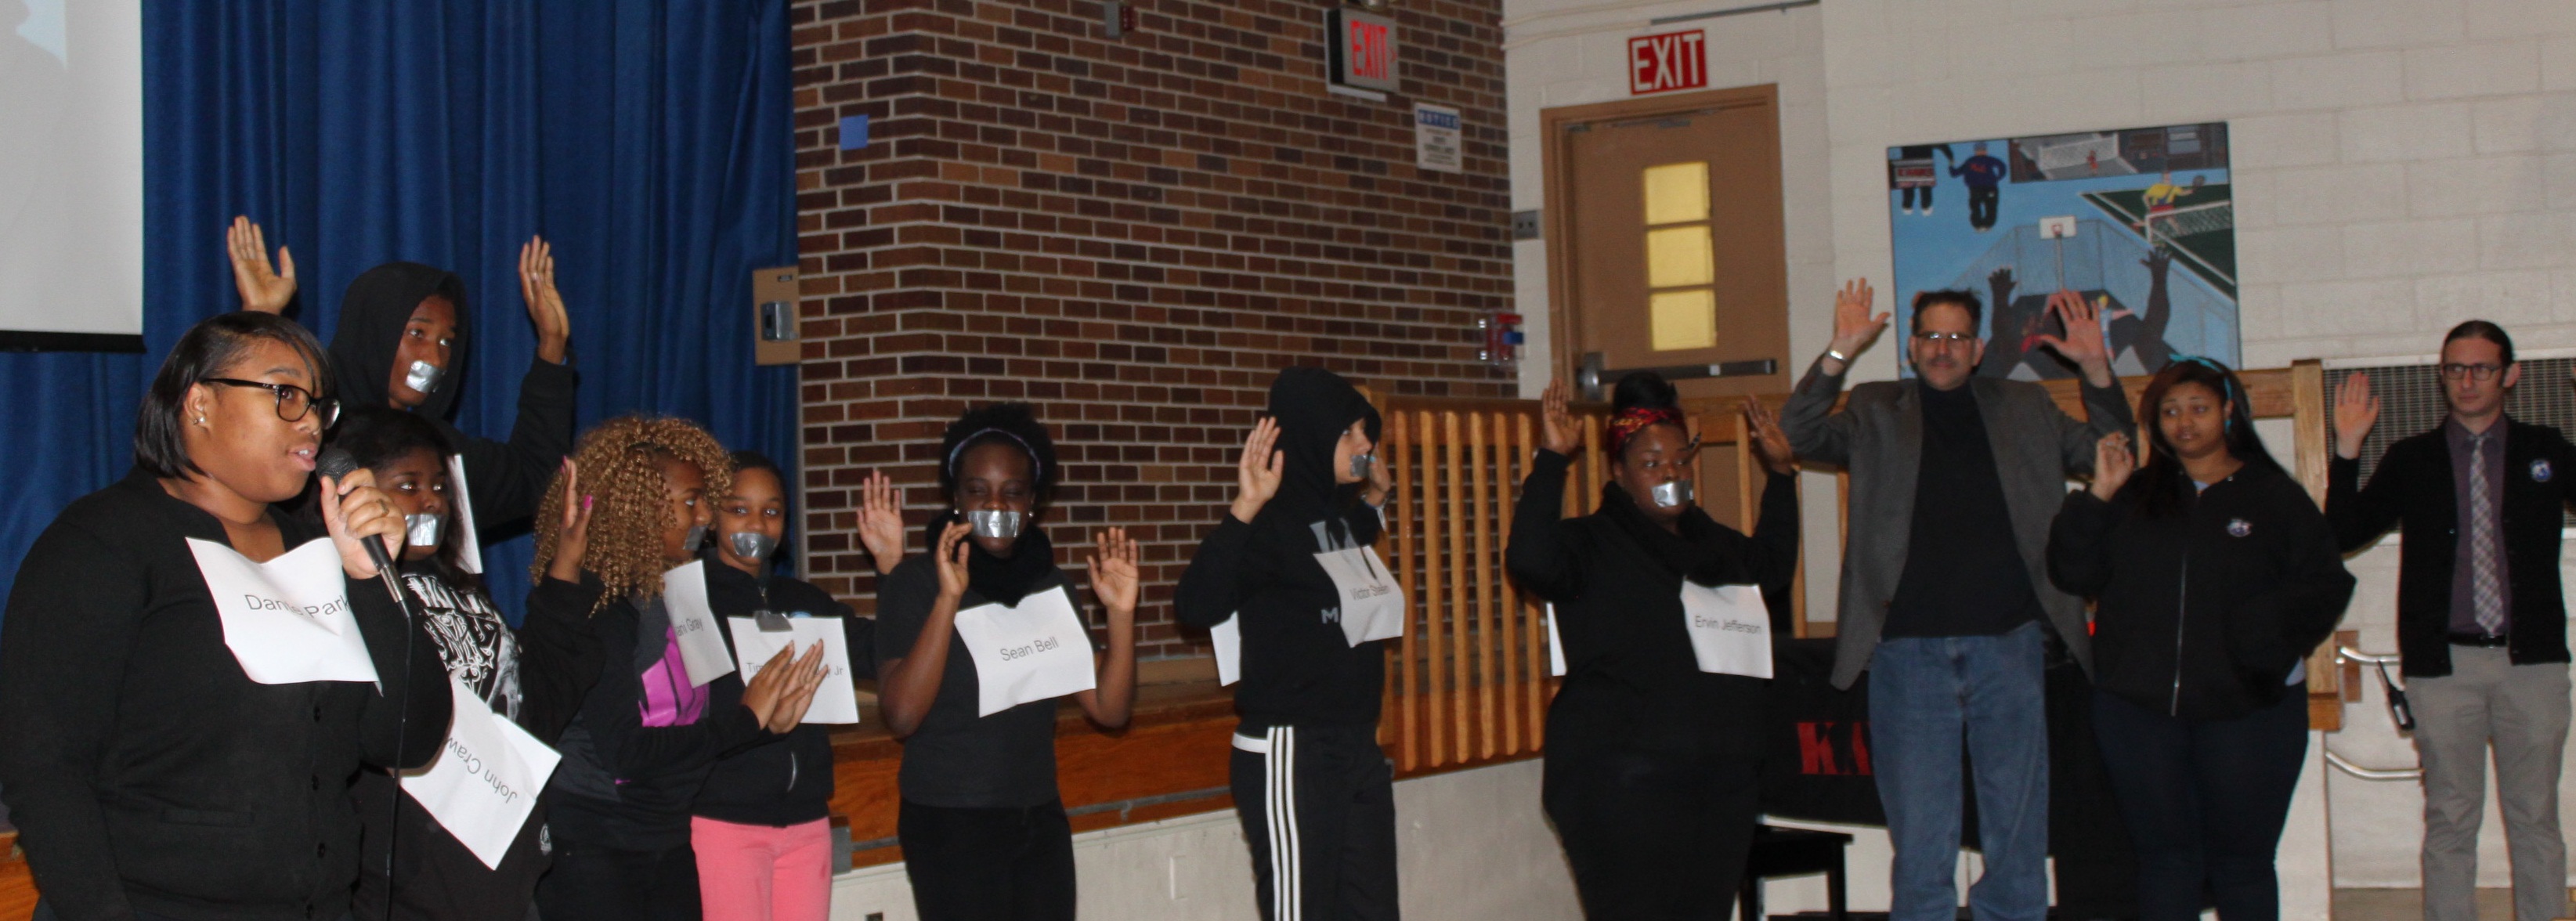 Our Jr. NAACP Club members led a Moment of Silence for Ferguson this morning at Muster.